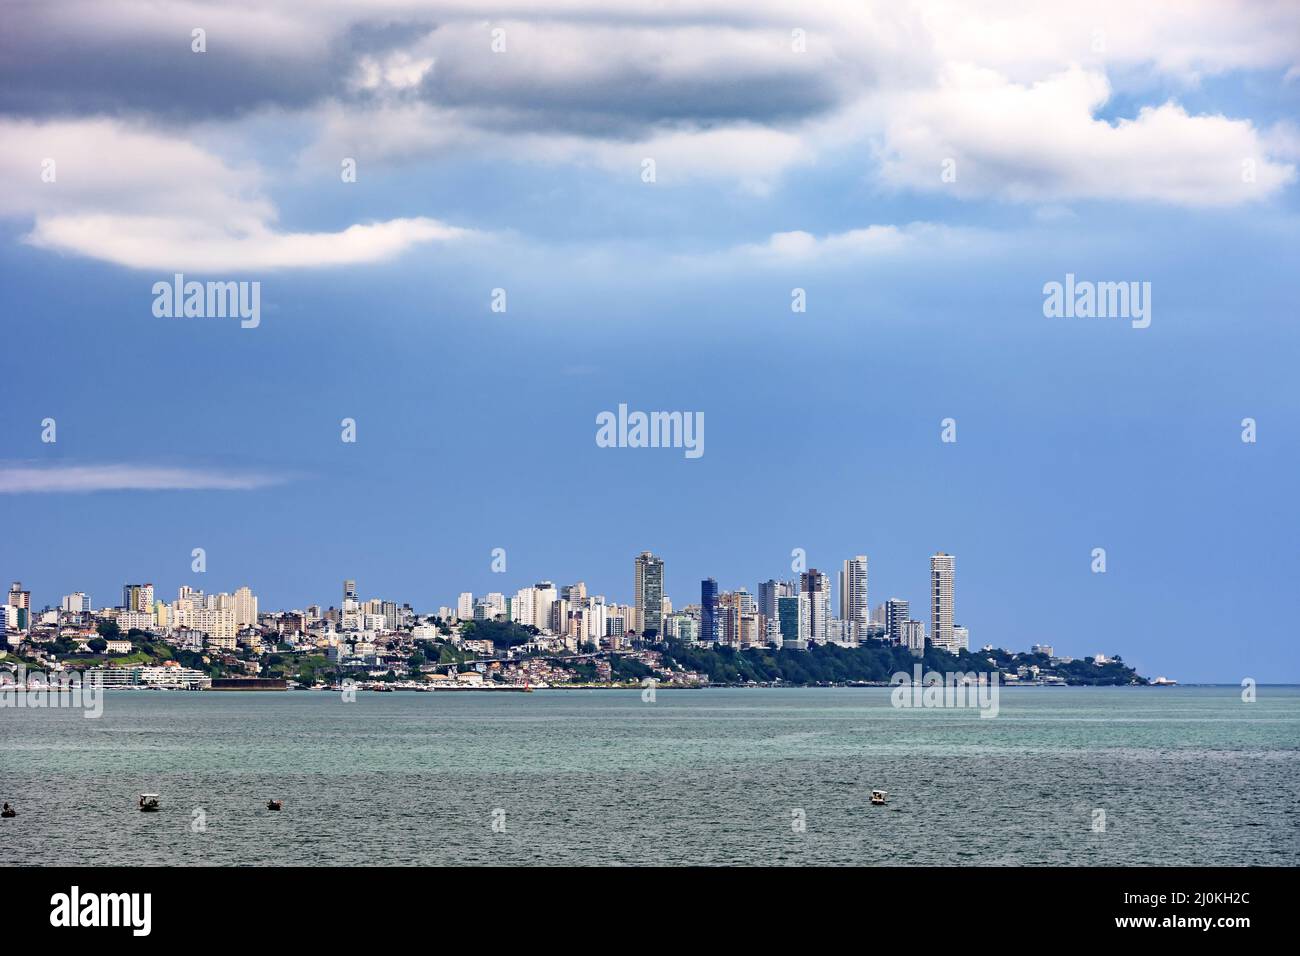 View of buildings and buildings in the city of Salvador Stock Photo